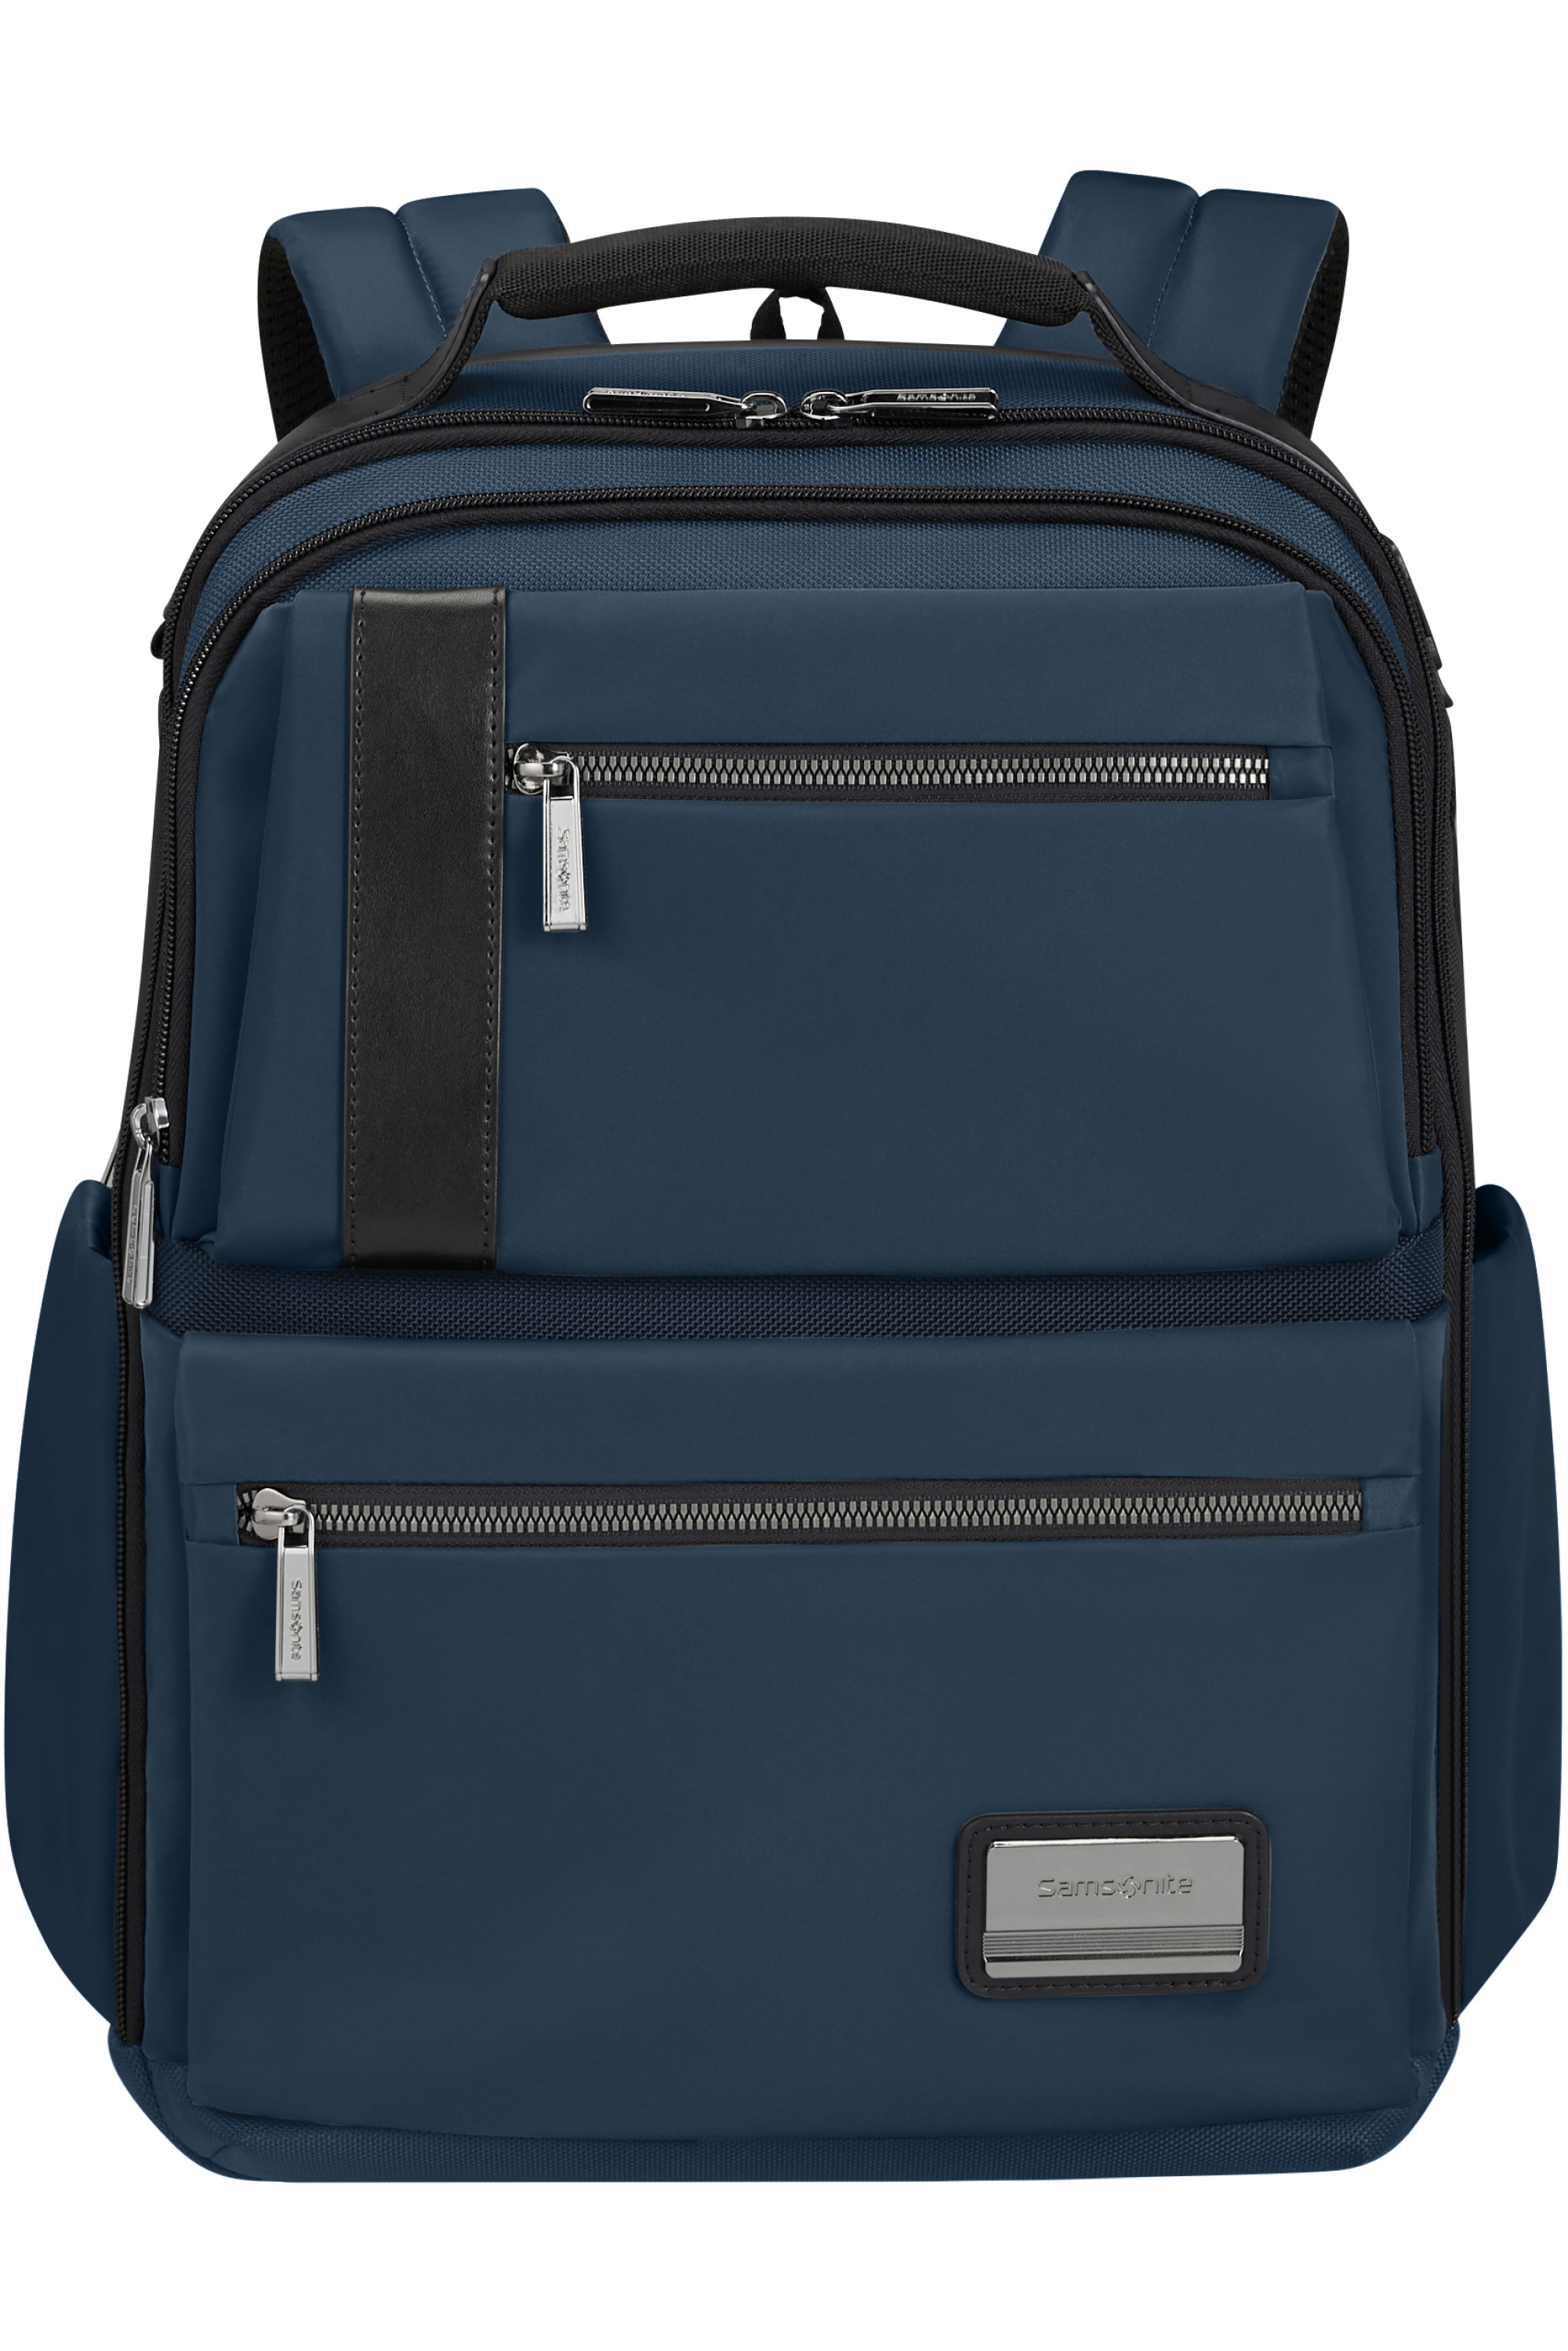 137207-1971-137207_1971_openroad_2-0_laptop_backpack_14-1_front-e8952d8b-e399-4bd6-92cf-acbb00e731dd-png